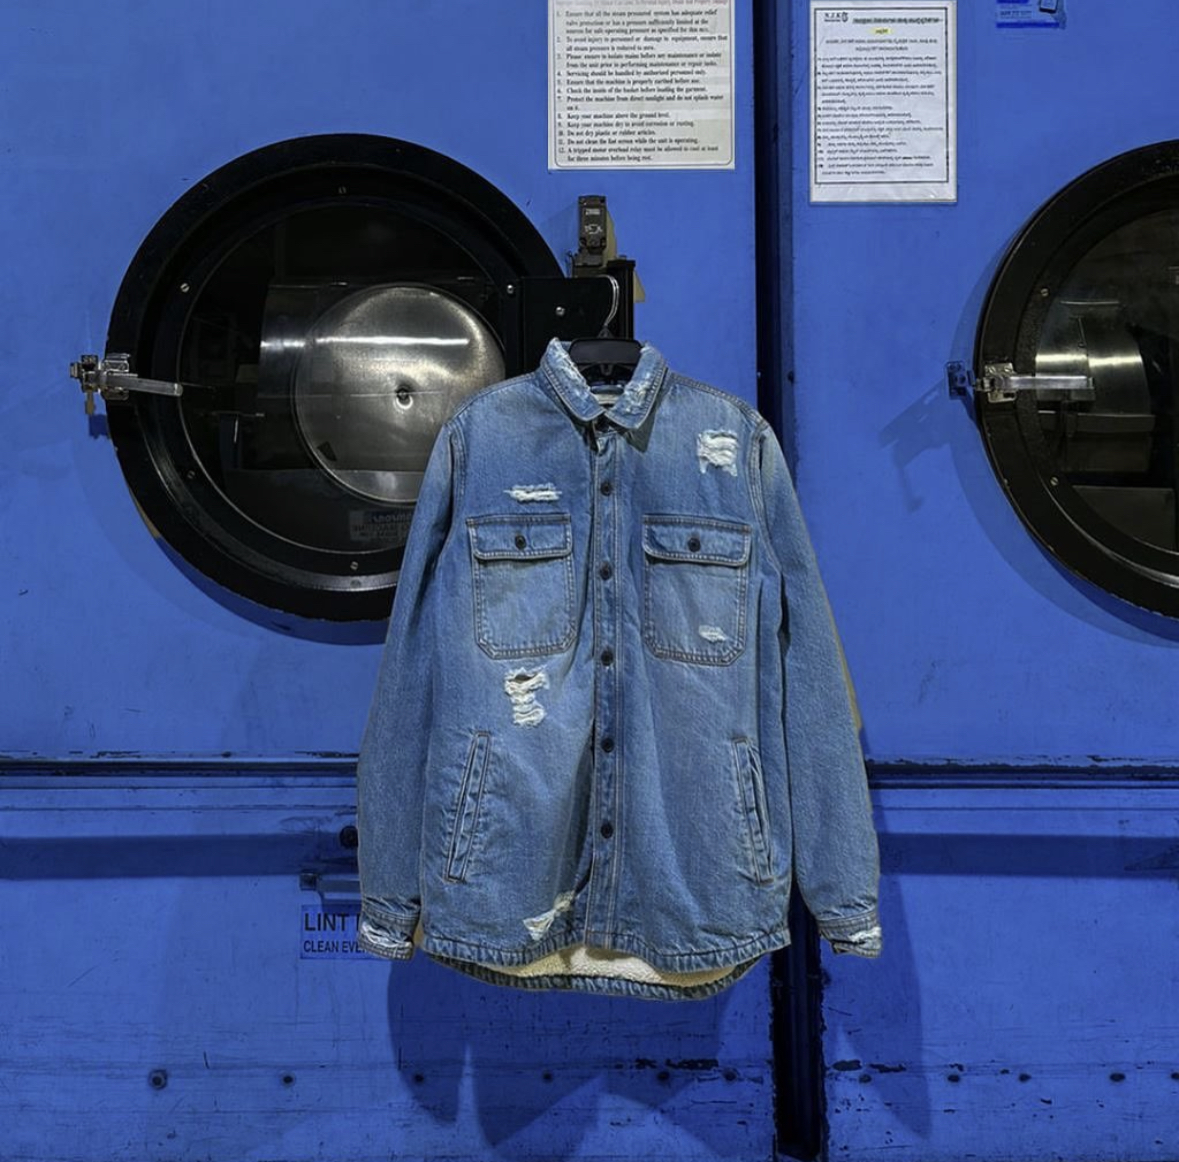 Denim shirt in front of blue laundry machine